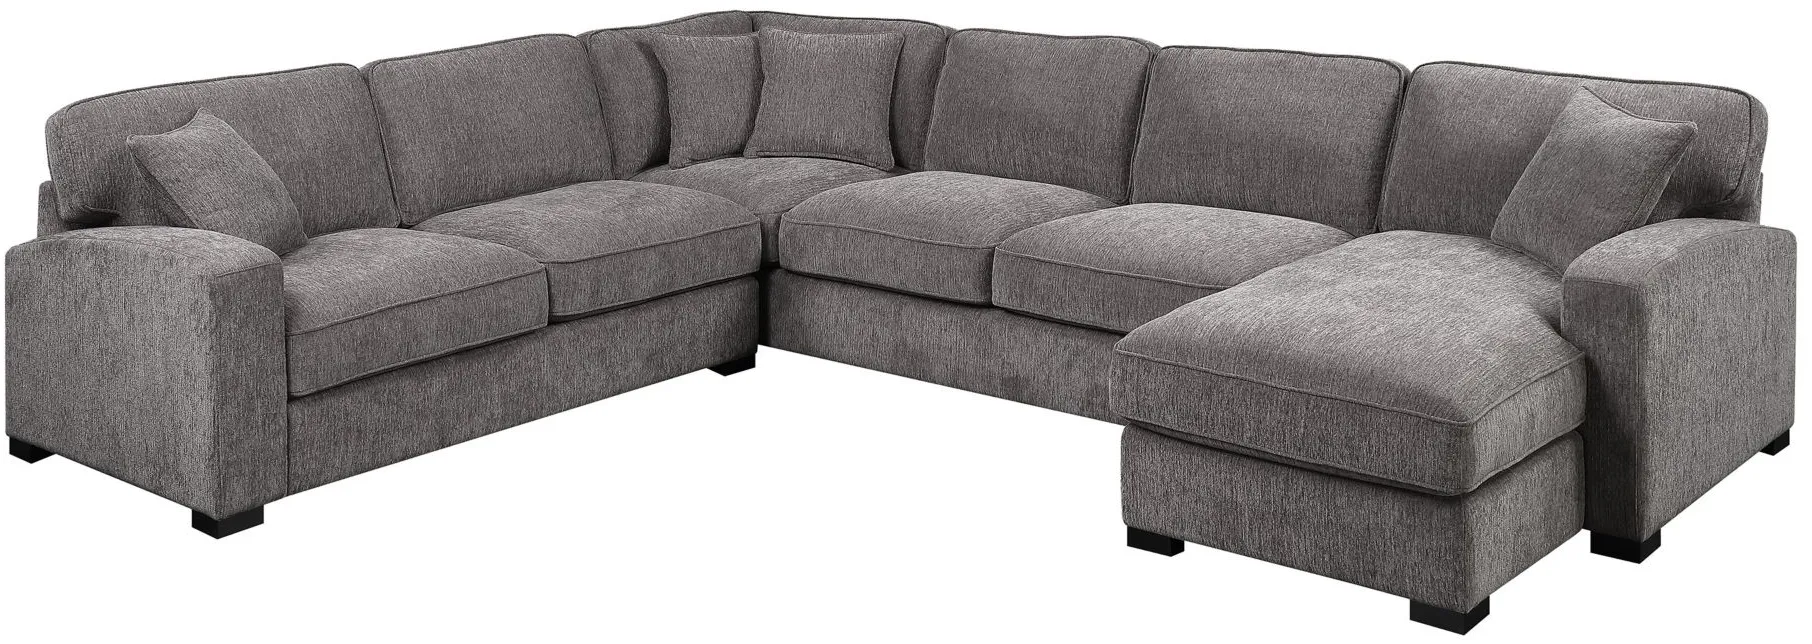 Repose 3-pc. Sectional in Dark Gray by Emerald Home Furnishings